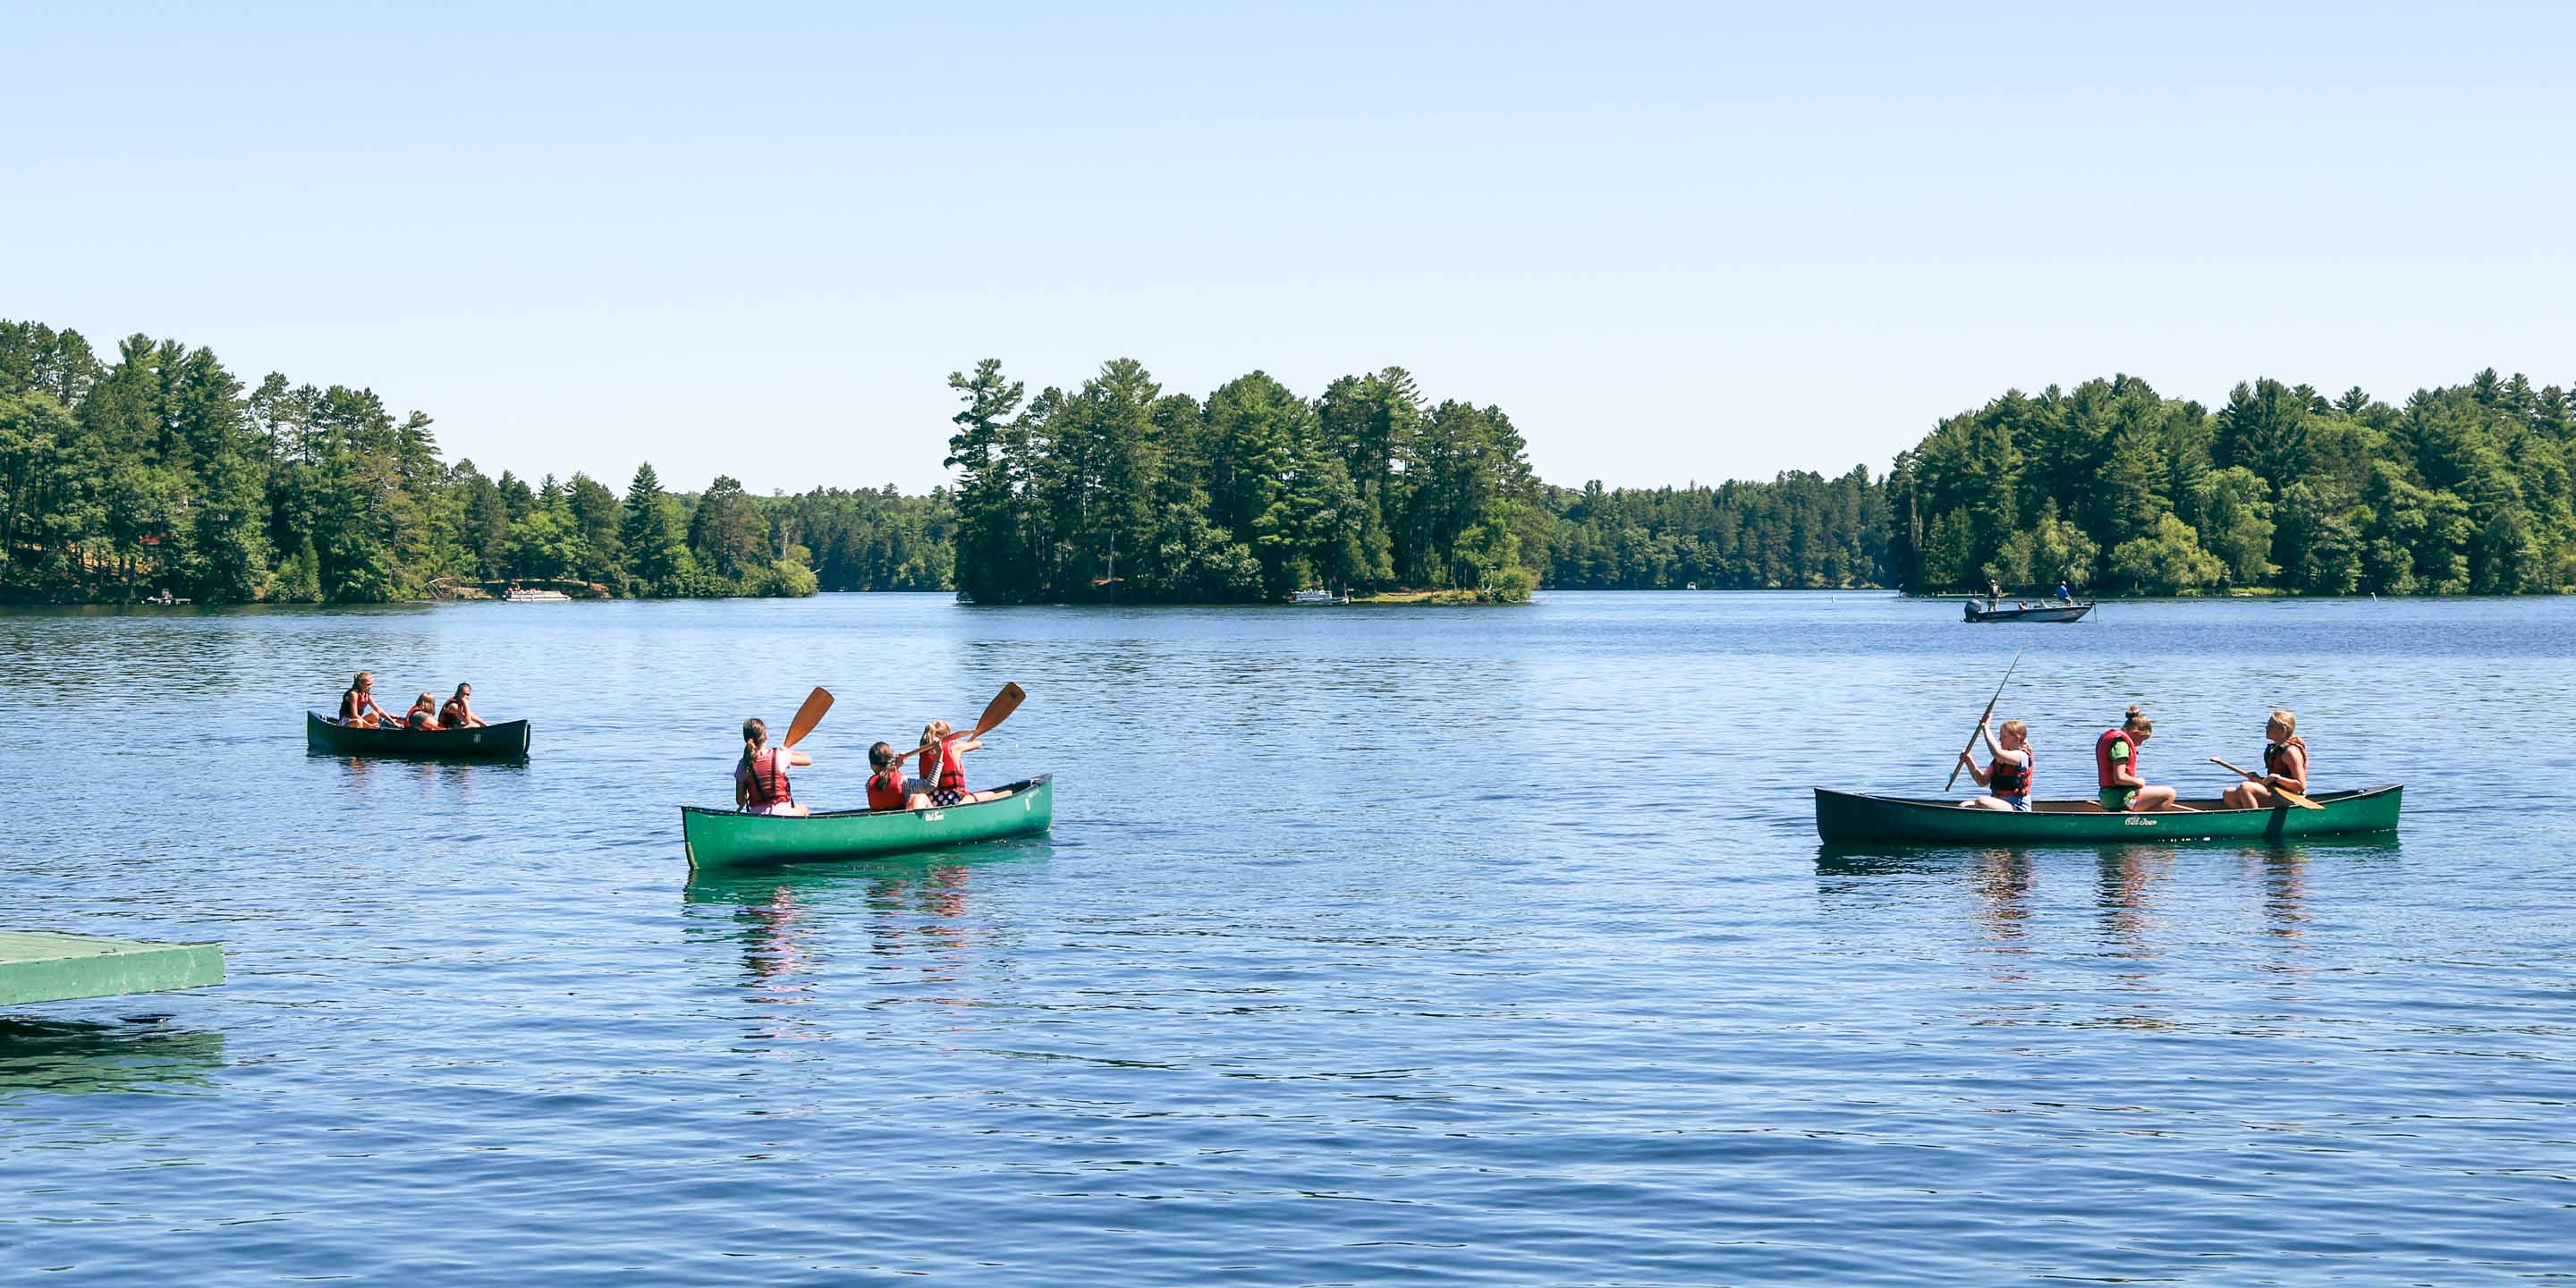 Three canoes carrying campers across the lake